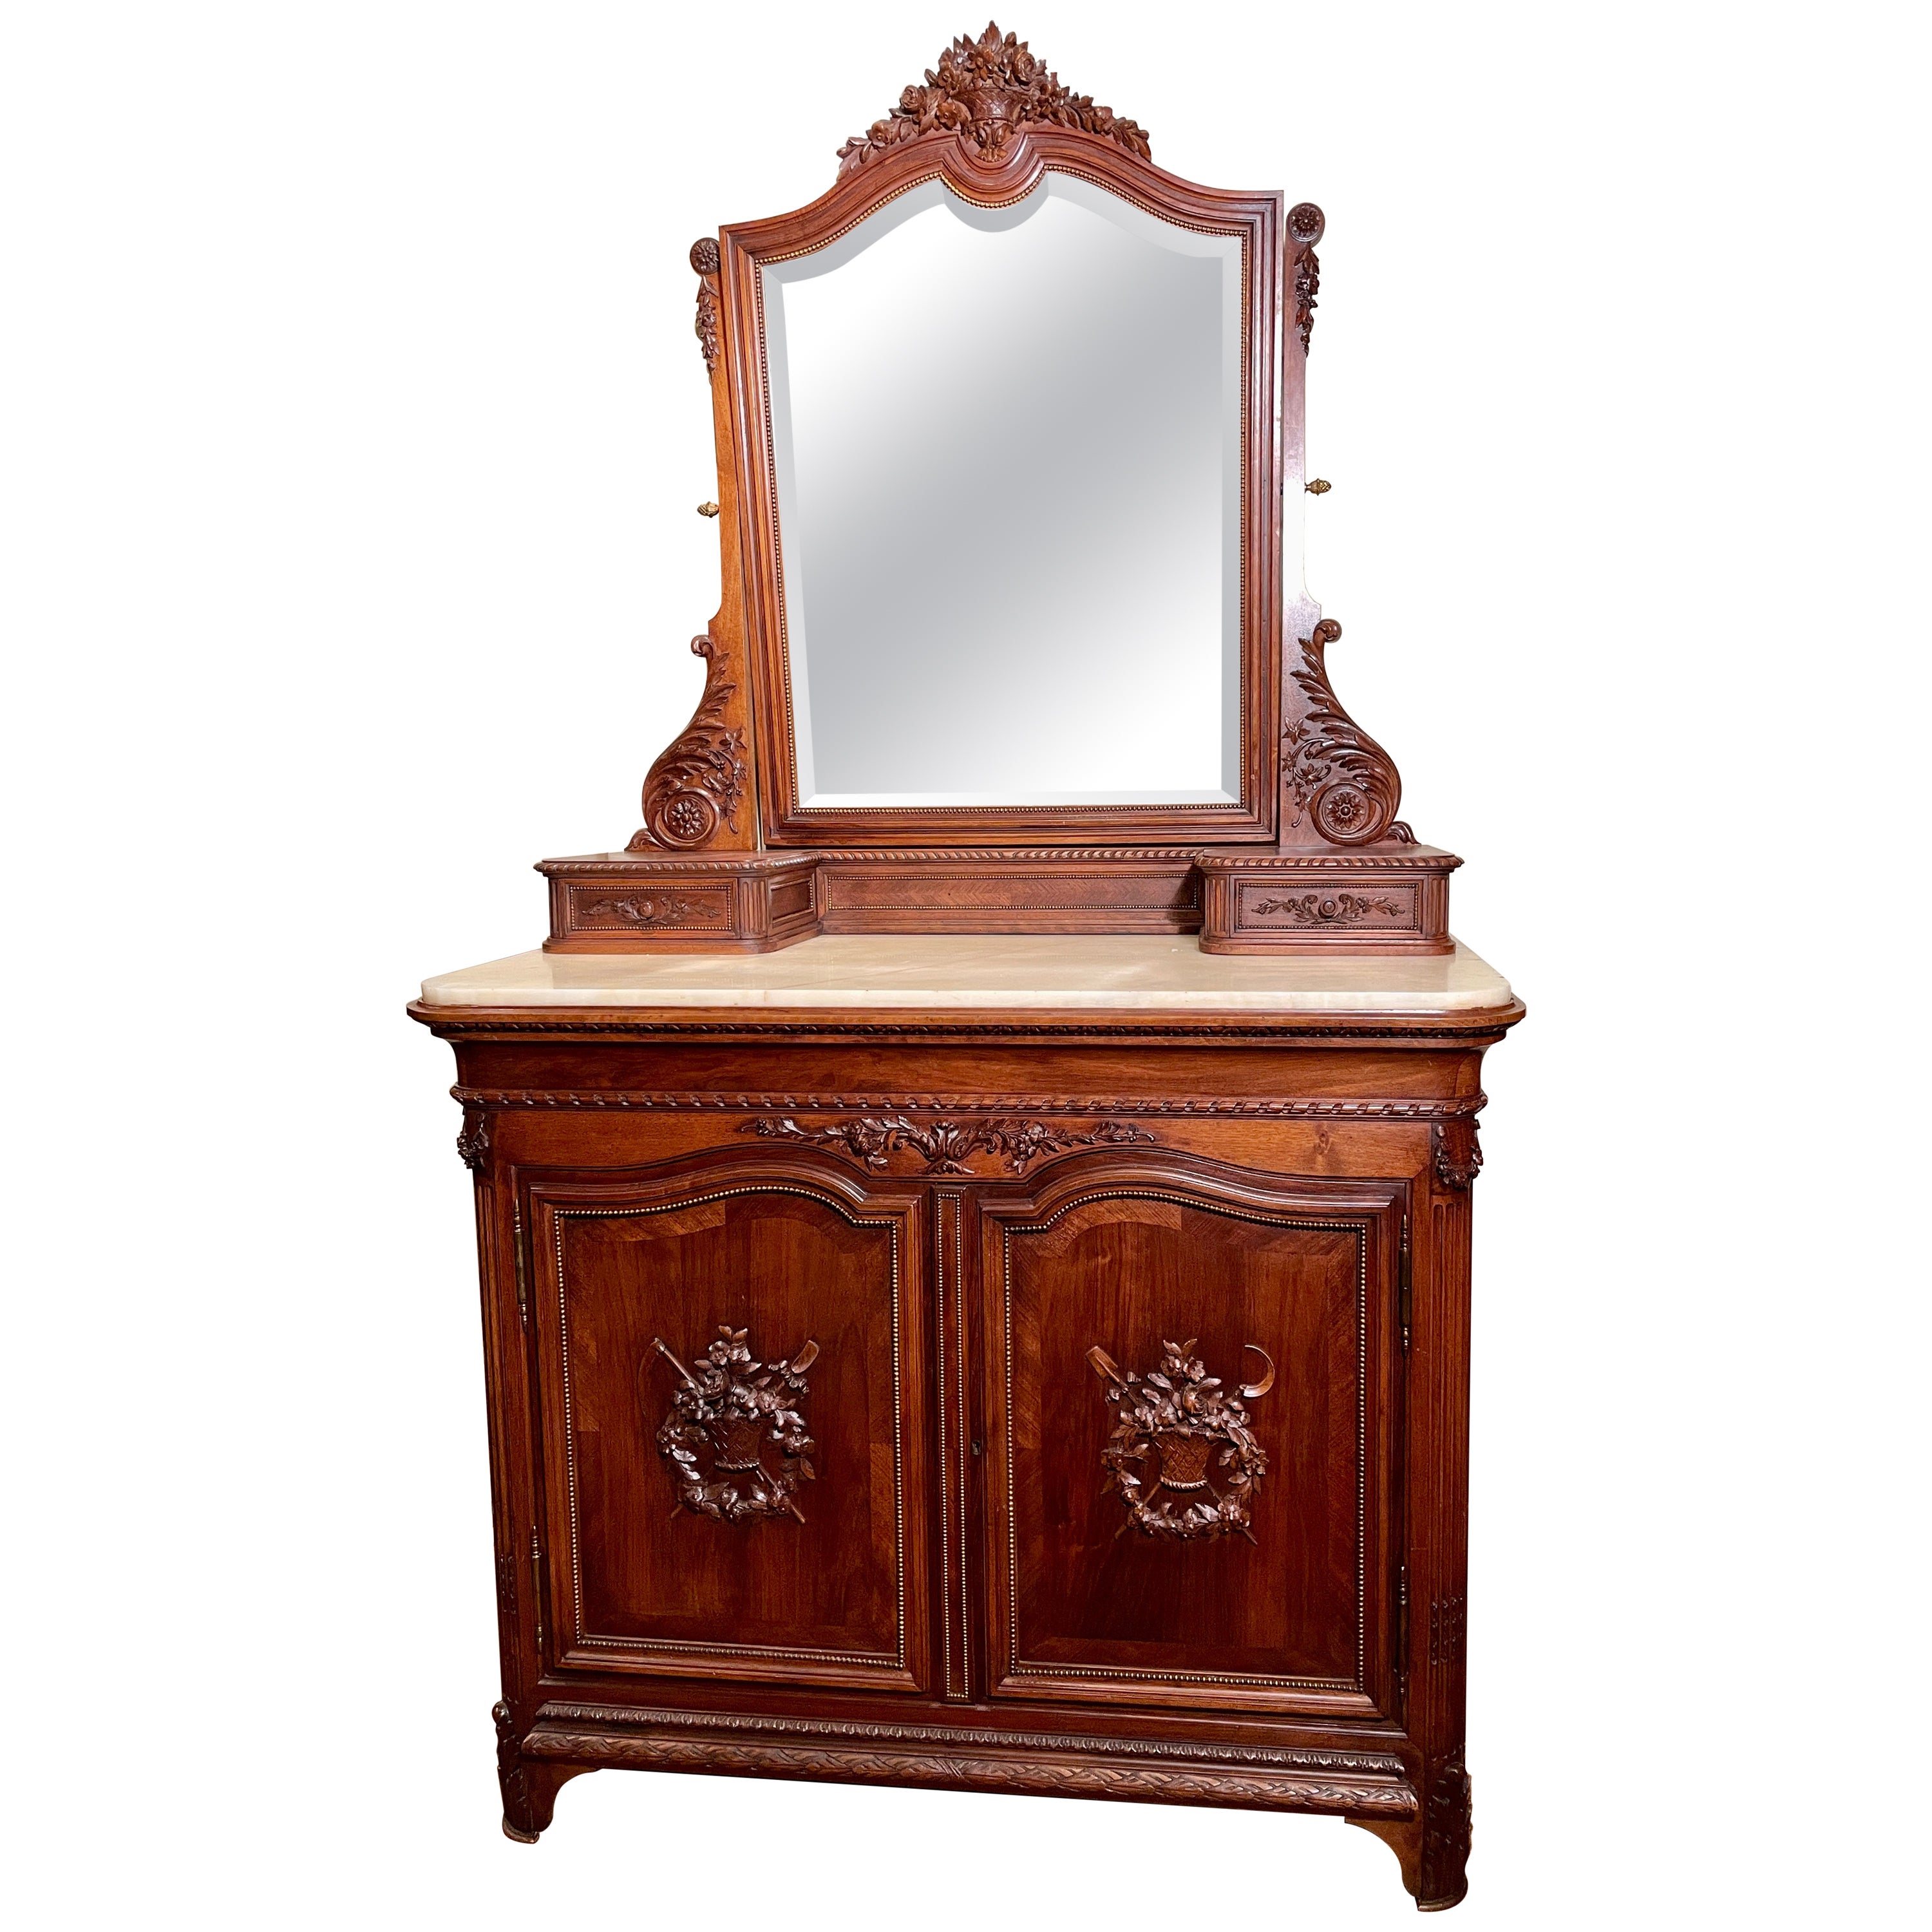 Antique French Louis XVI Carved Mahogany Marble Top Dresser with Mirror, c 1890